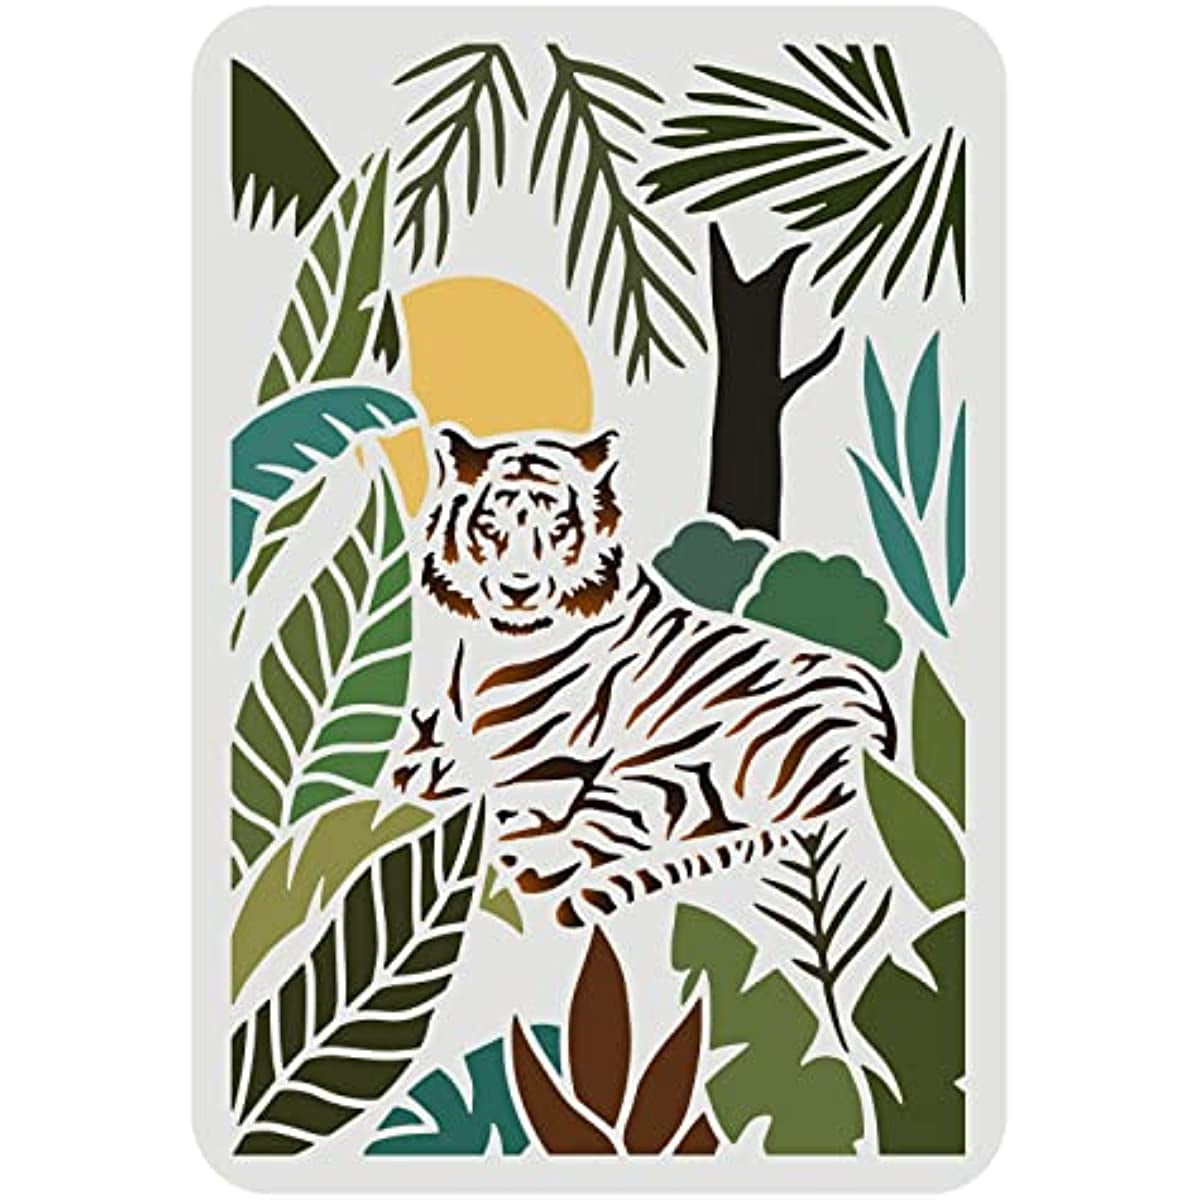 Tiger Stencils  inch Wild Animal Stencils Plastic Jungle Tiger Stencils  Templates DIY Forest Tiger Home Decor Stencil for Painting on Wood Floor  Wall 